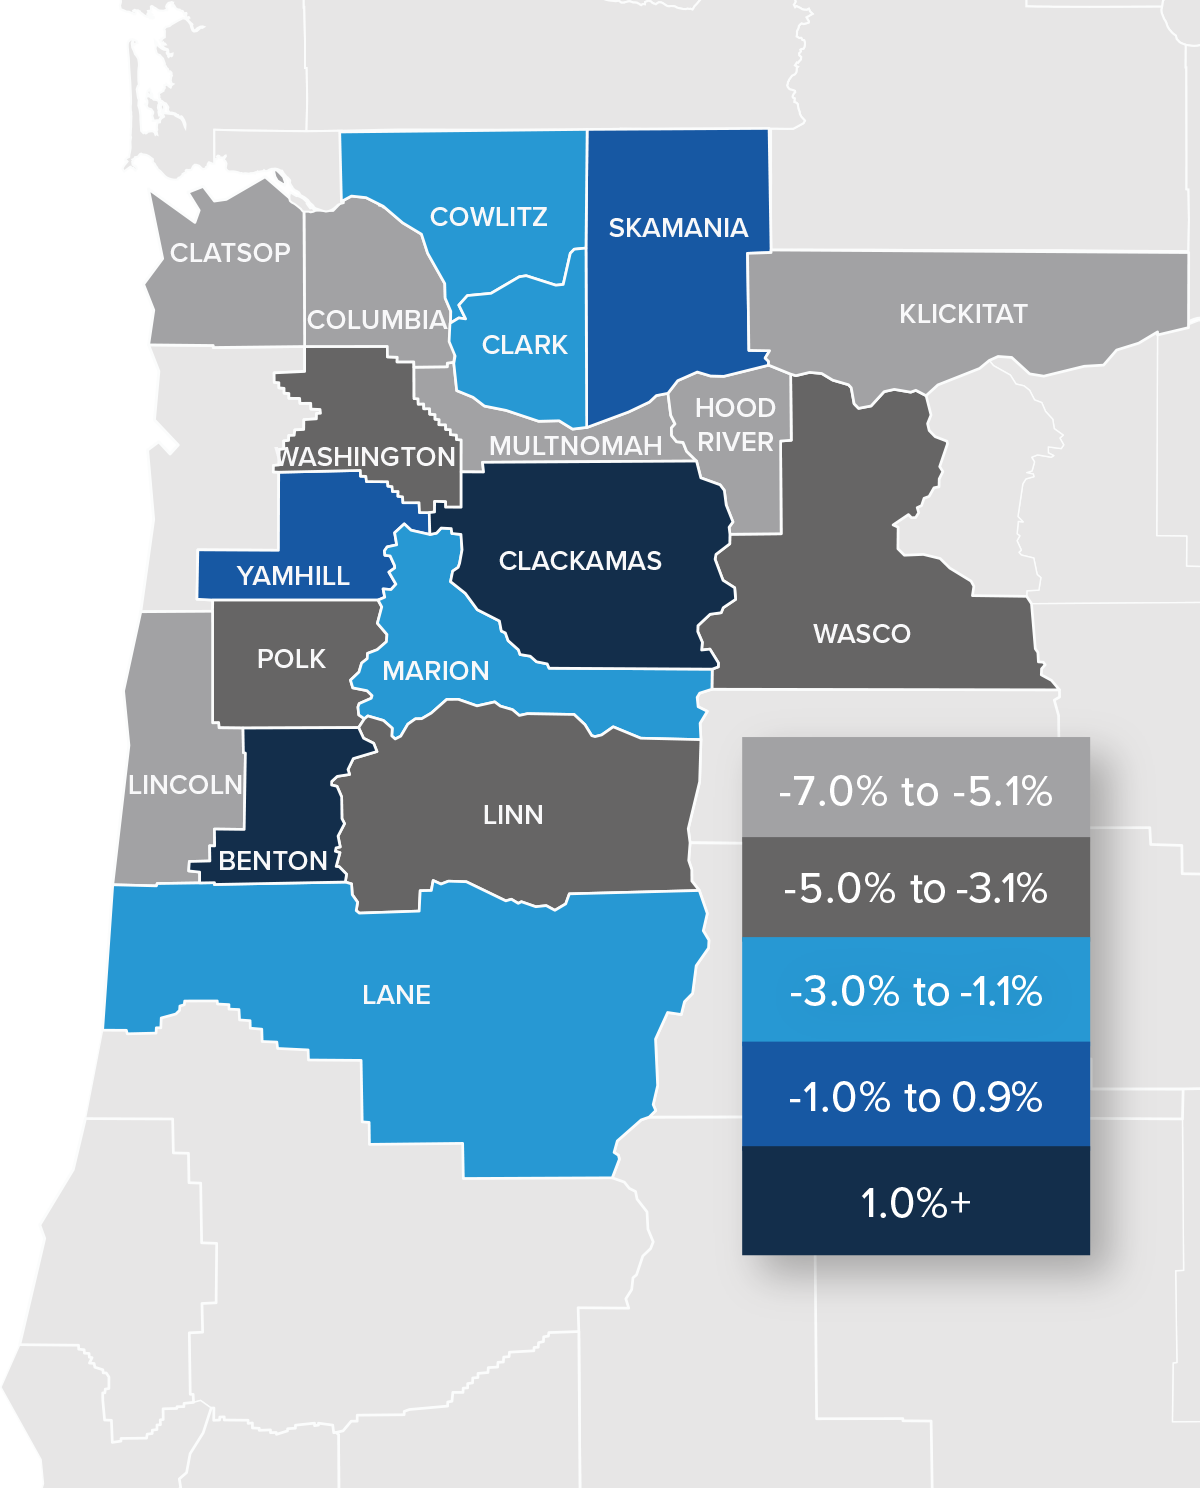 A map showing the real estate home prices percentage changes for various counties in Northwest Oregon and Southwest Washington. Different colors correspond to different tiers of percentage change. Clatsop, Columbia, Klickitat, Multnomah, Hood River, and Lincoln counties have a percentage change in the -7% to -5.1% range. Wasco, Washington, Polk, and Linn are in the -5% to -3.1% change range. Cowlitz, Clark, Marion, and Lane are in the -3% to -1.1% change range. Yamhill and Skamania are in the -1% to 0.9% change range. Benton and Clackamas counties were in the 1%+ change range.